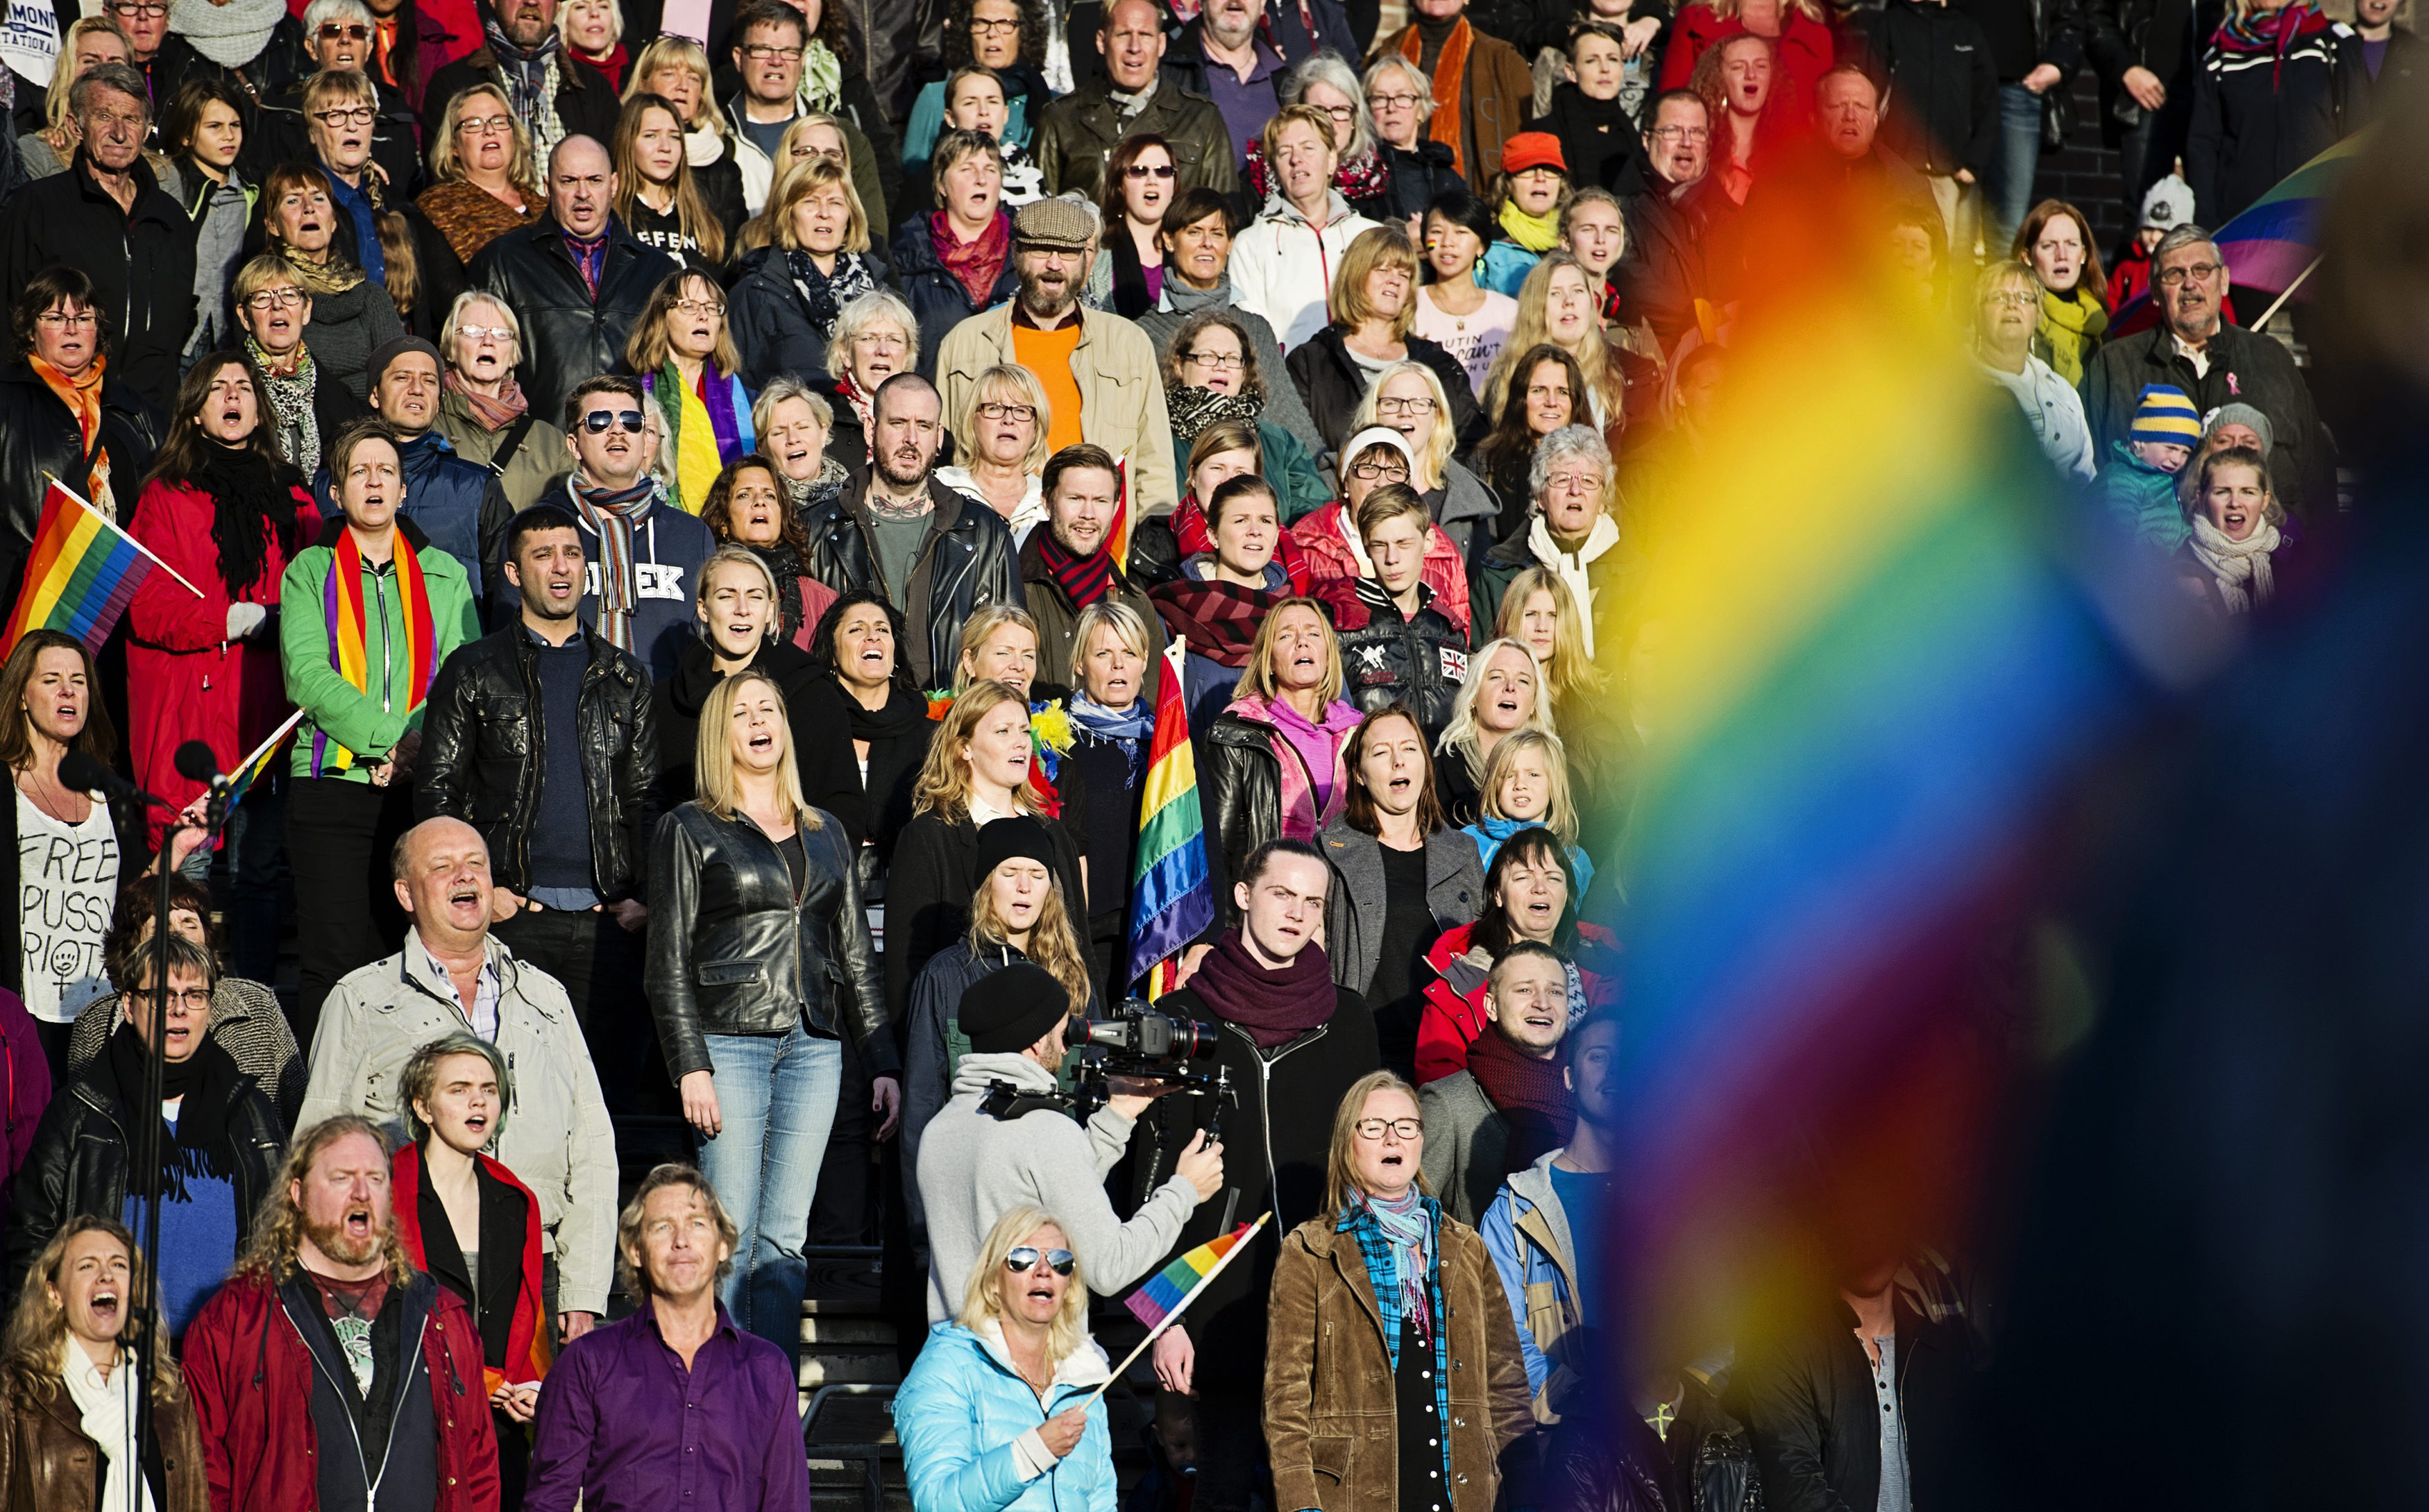 6 October 2013, Sweden. People sing the Russian national anthem while raising rainbow flags in solidarity with the Russian LGBT community at the Stockholm Olympic Stadium.